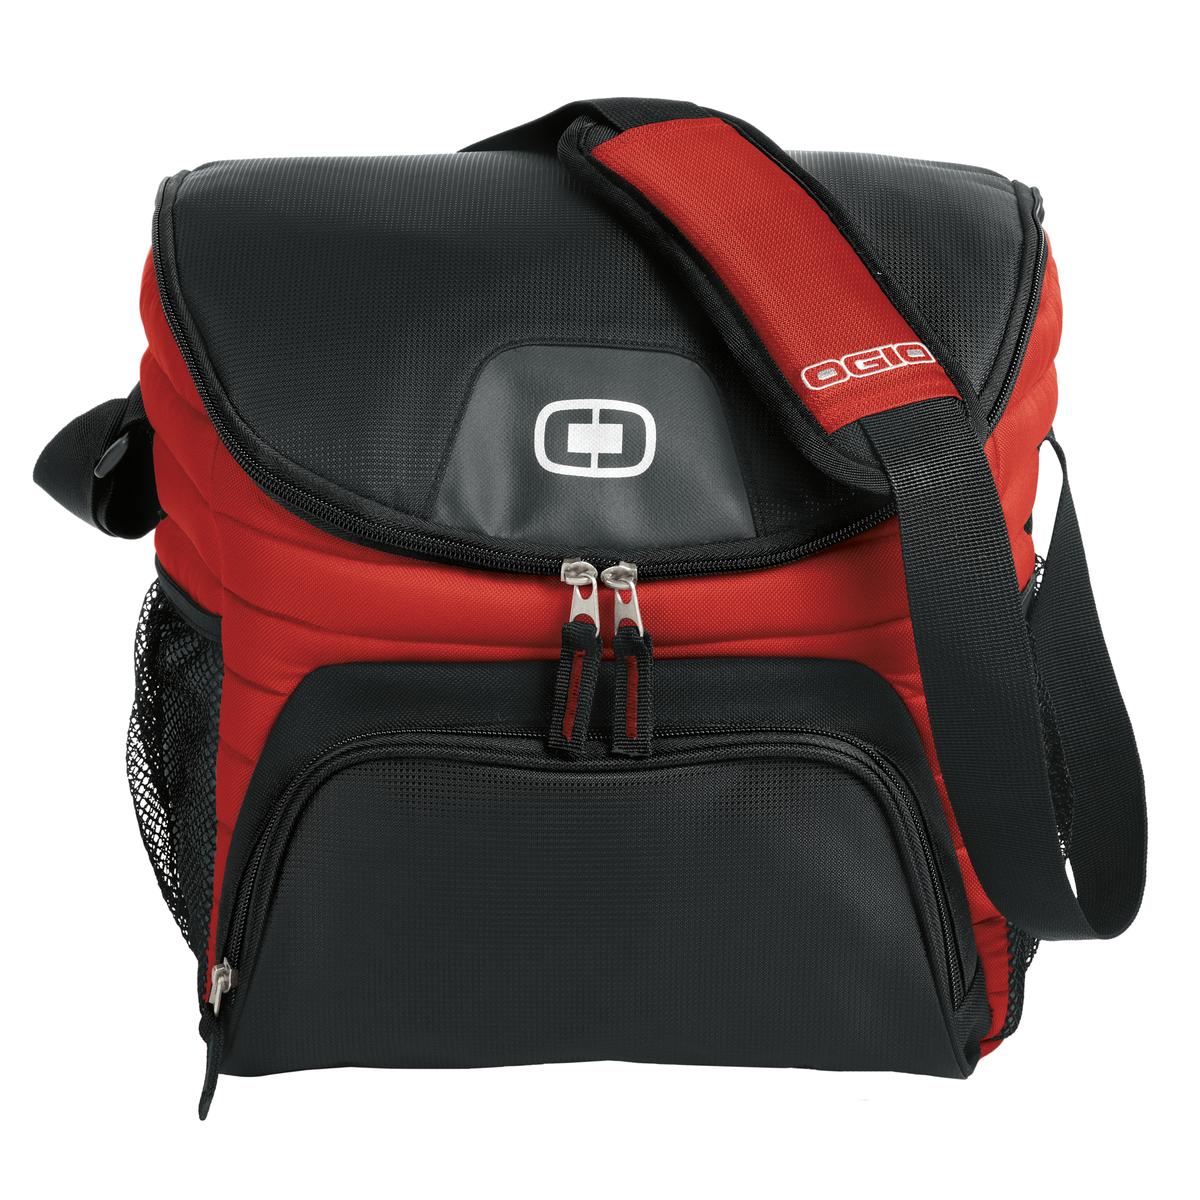 OGIO® - Chill 18-24 Can Cooler. 408113 - DFW Impression